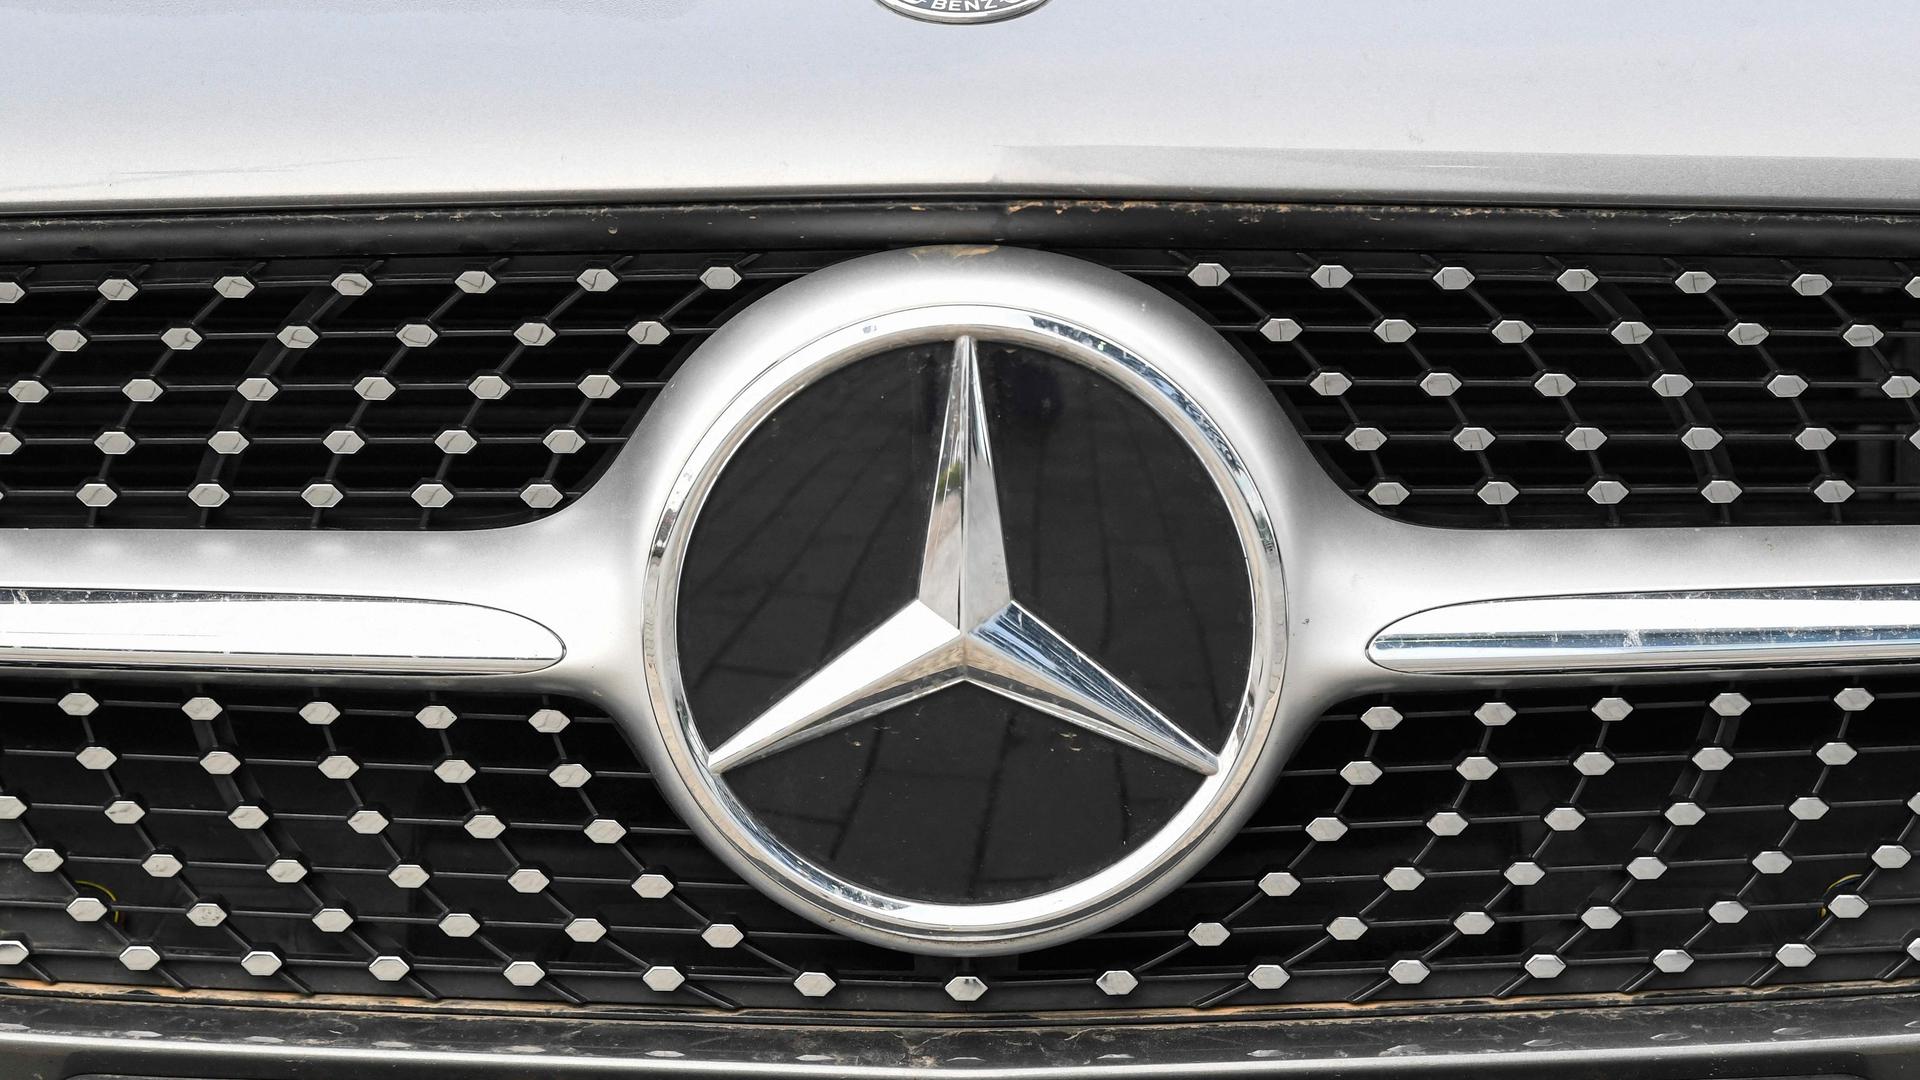 A Mercedes-Benz star is pictured is seen on the front of an passenger car in Stuttgart, southern Germany, on February 18, 2021 as Daimler holds the annual press conference as an online event.  Mercedes-Benz parent company Daimler on February 18, 2021 released preliminary earnings data for 2020 showing higher-than-expected operating profit in a year battered by the coronavirus pandemic. / AFP / THOMAS KIENZLE